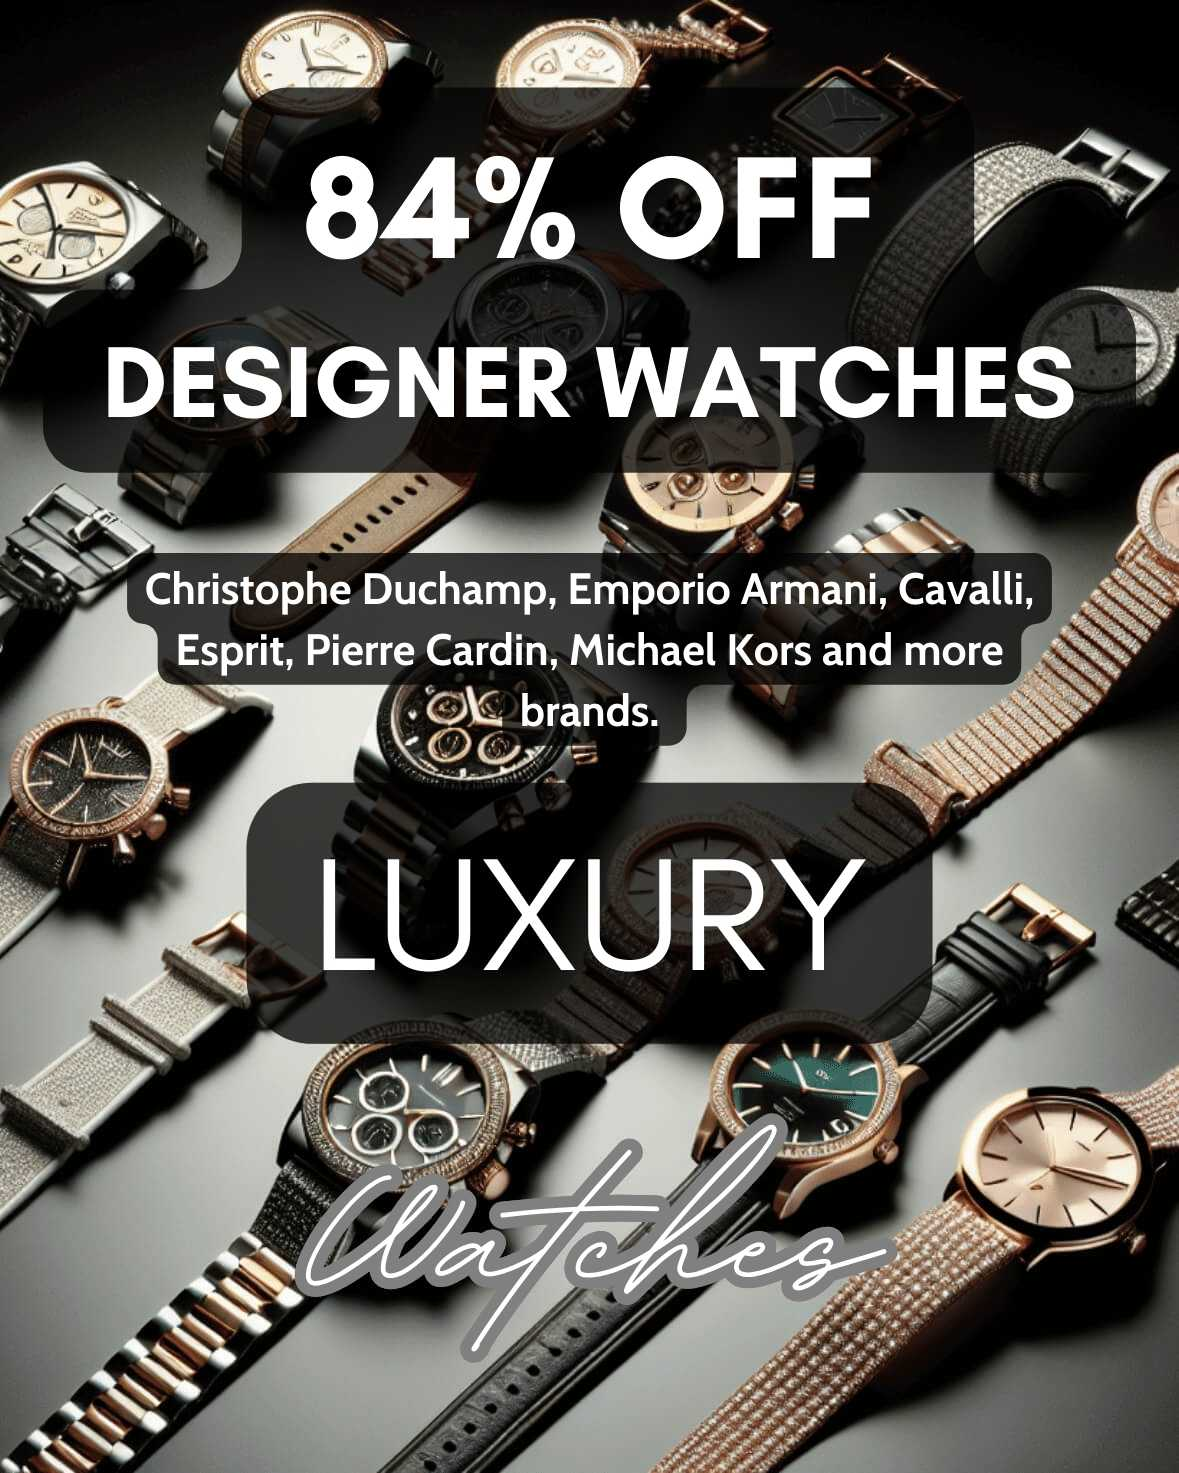 Collage of elegant men's and women's designer watches from Murillo Merchandise – affordable luxury with renowned brands like Michael Kors, Christophe Duchamp, Cavalli, Esprit, Pierre Cardin, and more designer brands. 